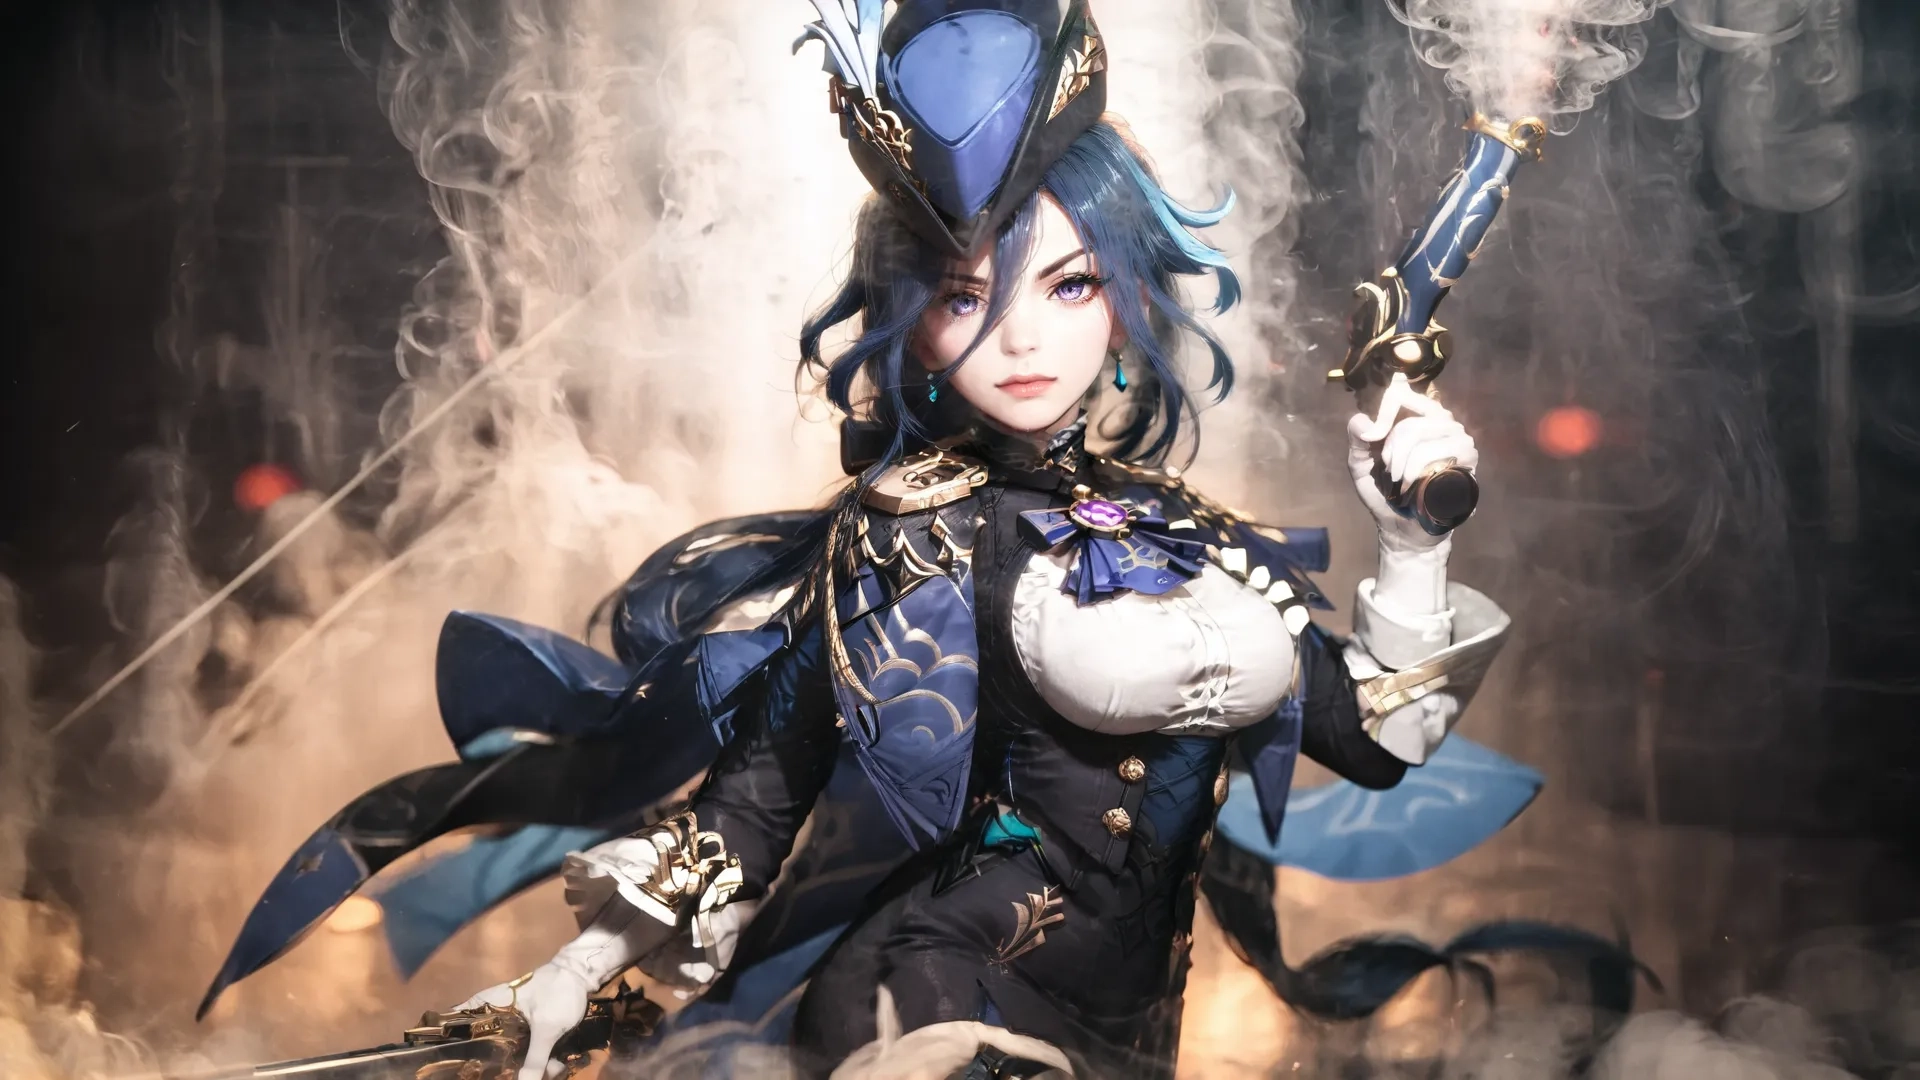 a beautiful looking lady holding two swords in a smoky background area, wearing gothic costume with elaborate hair and helmet and sword in her hands
